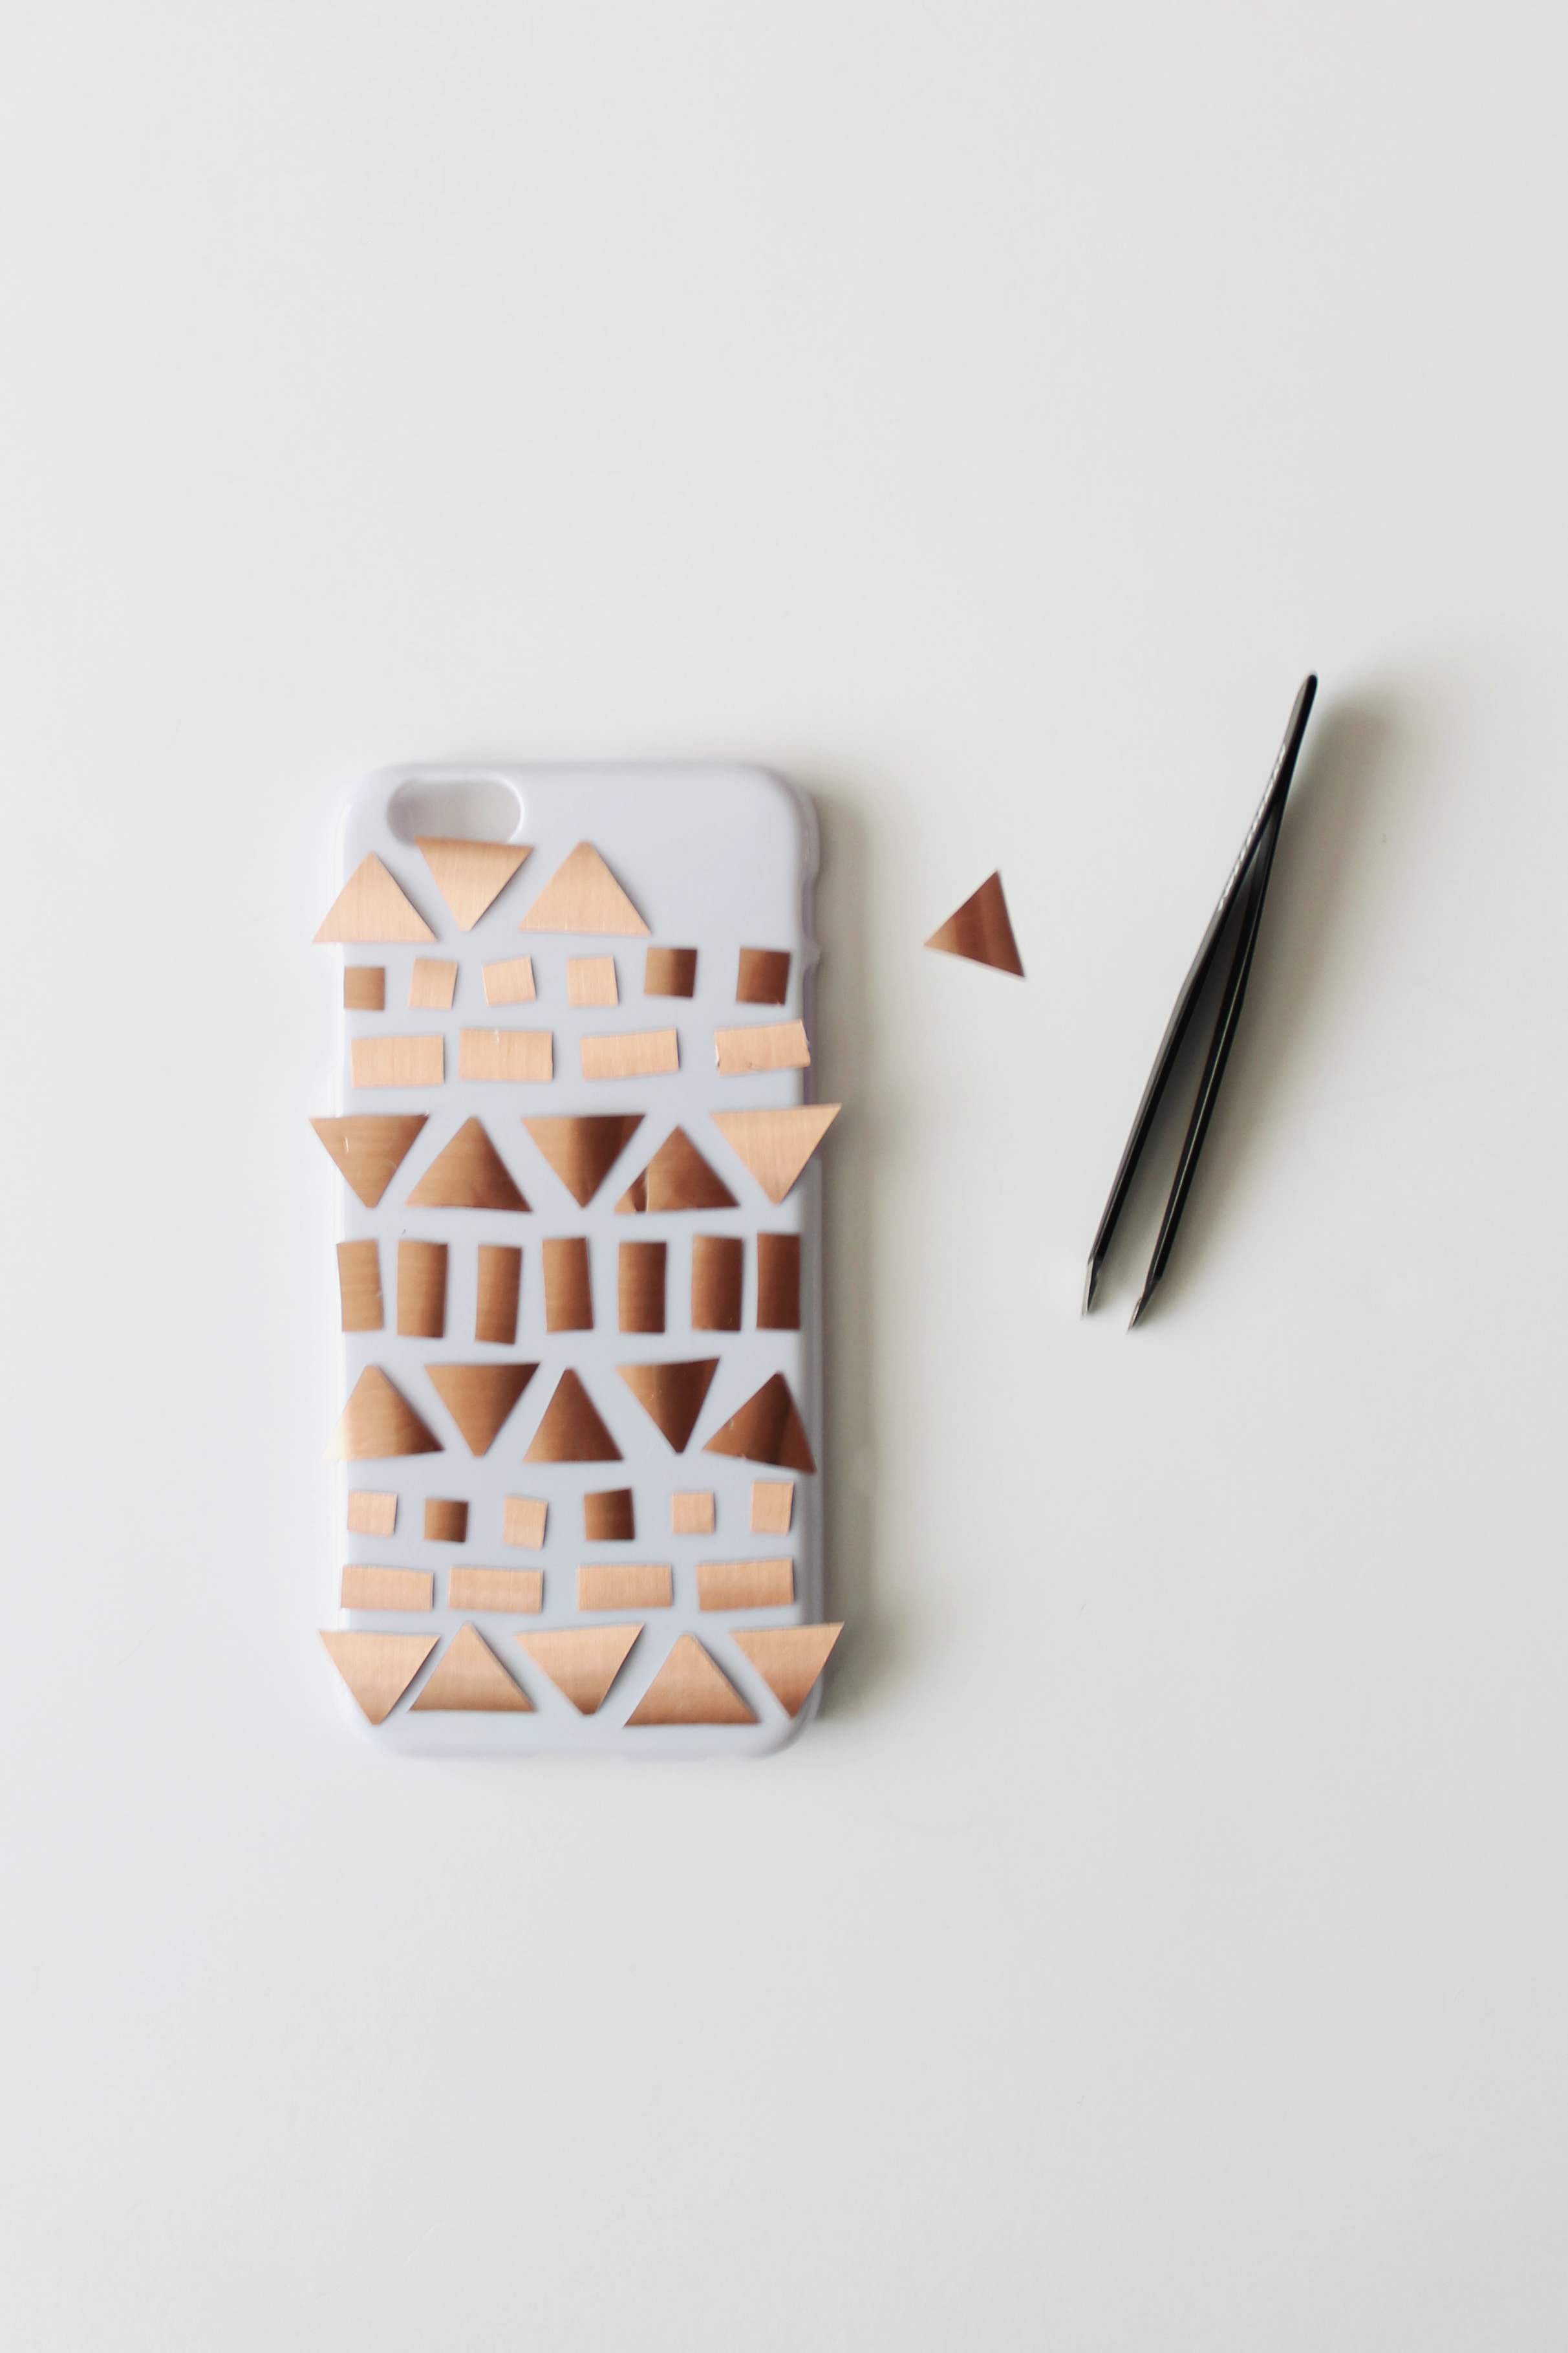 diy copper patterned phone case | almost makes perfect